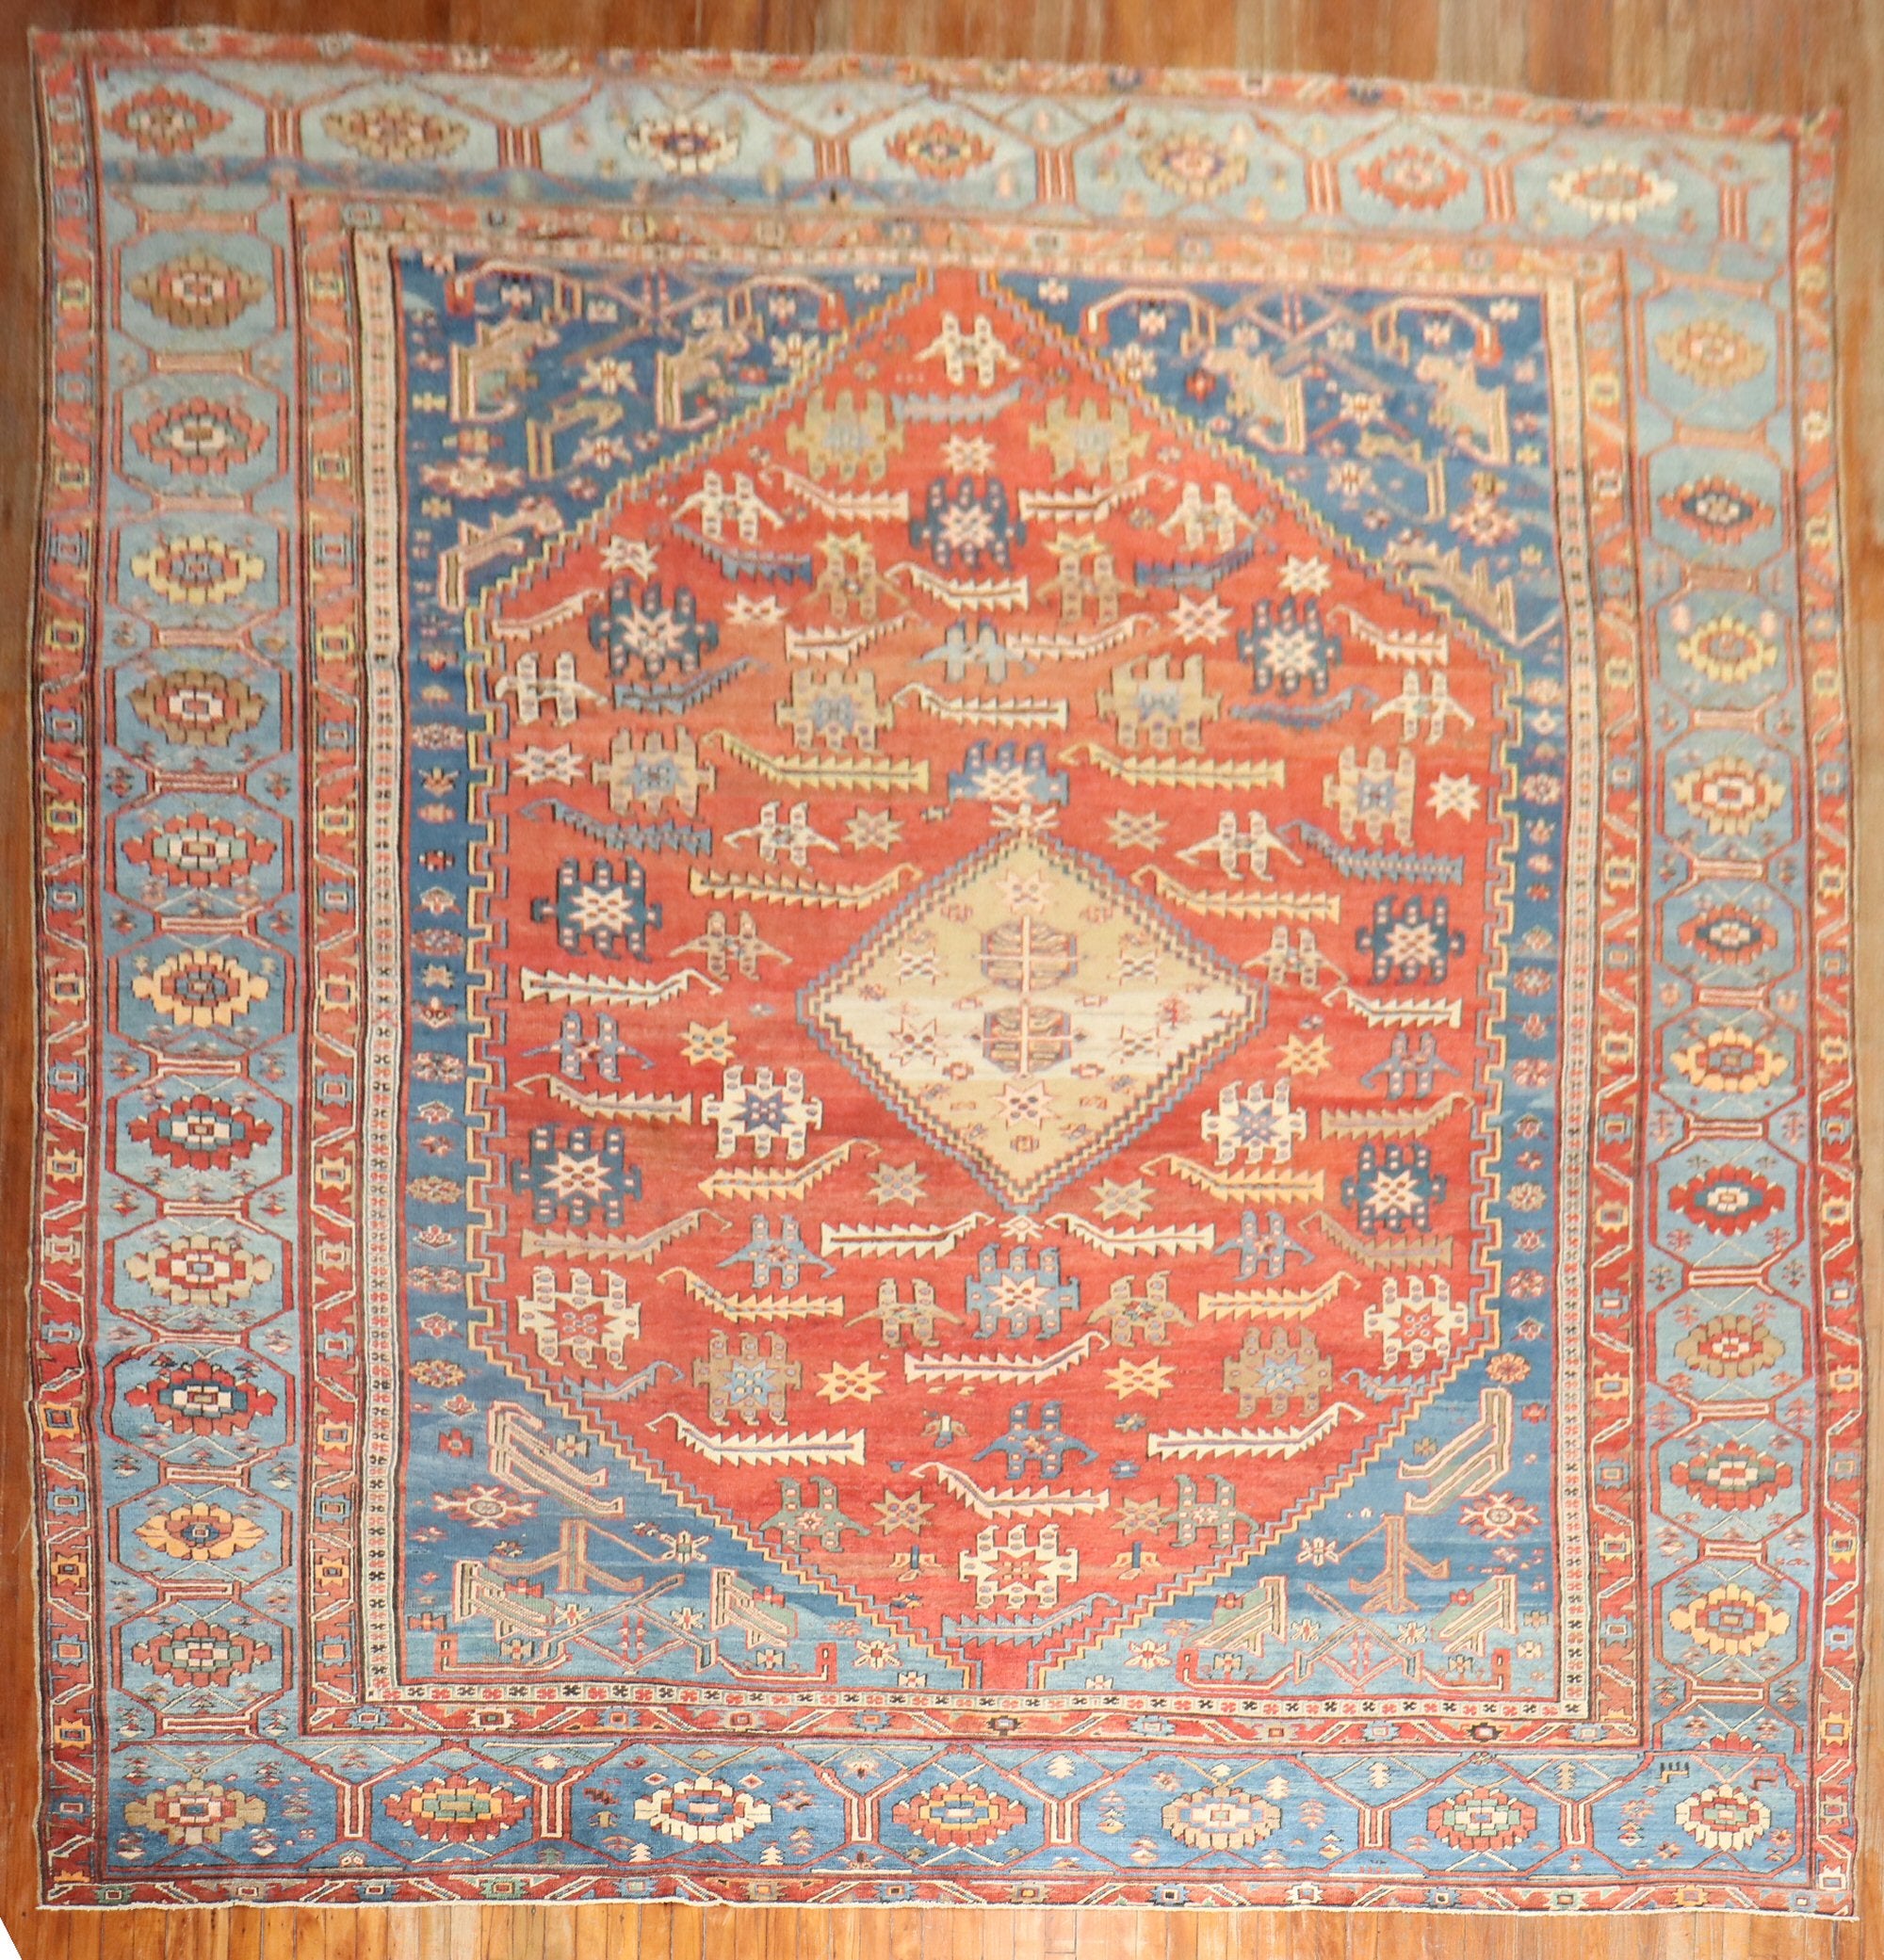 High collectible-quality large room size tribal early 20th century Persian Bakshaish rug. The harmonious colors, skillful geometry, and weavers craftsmanship make this rug an absolute work of art.

Measures: 11'4